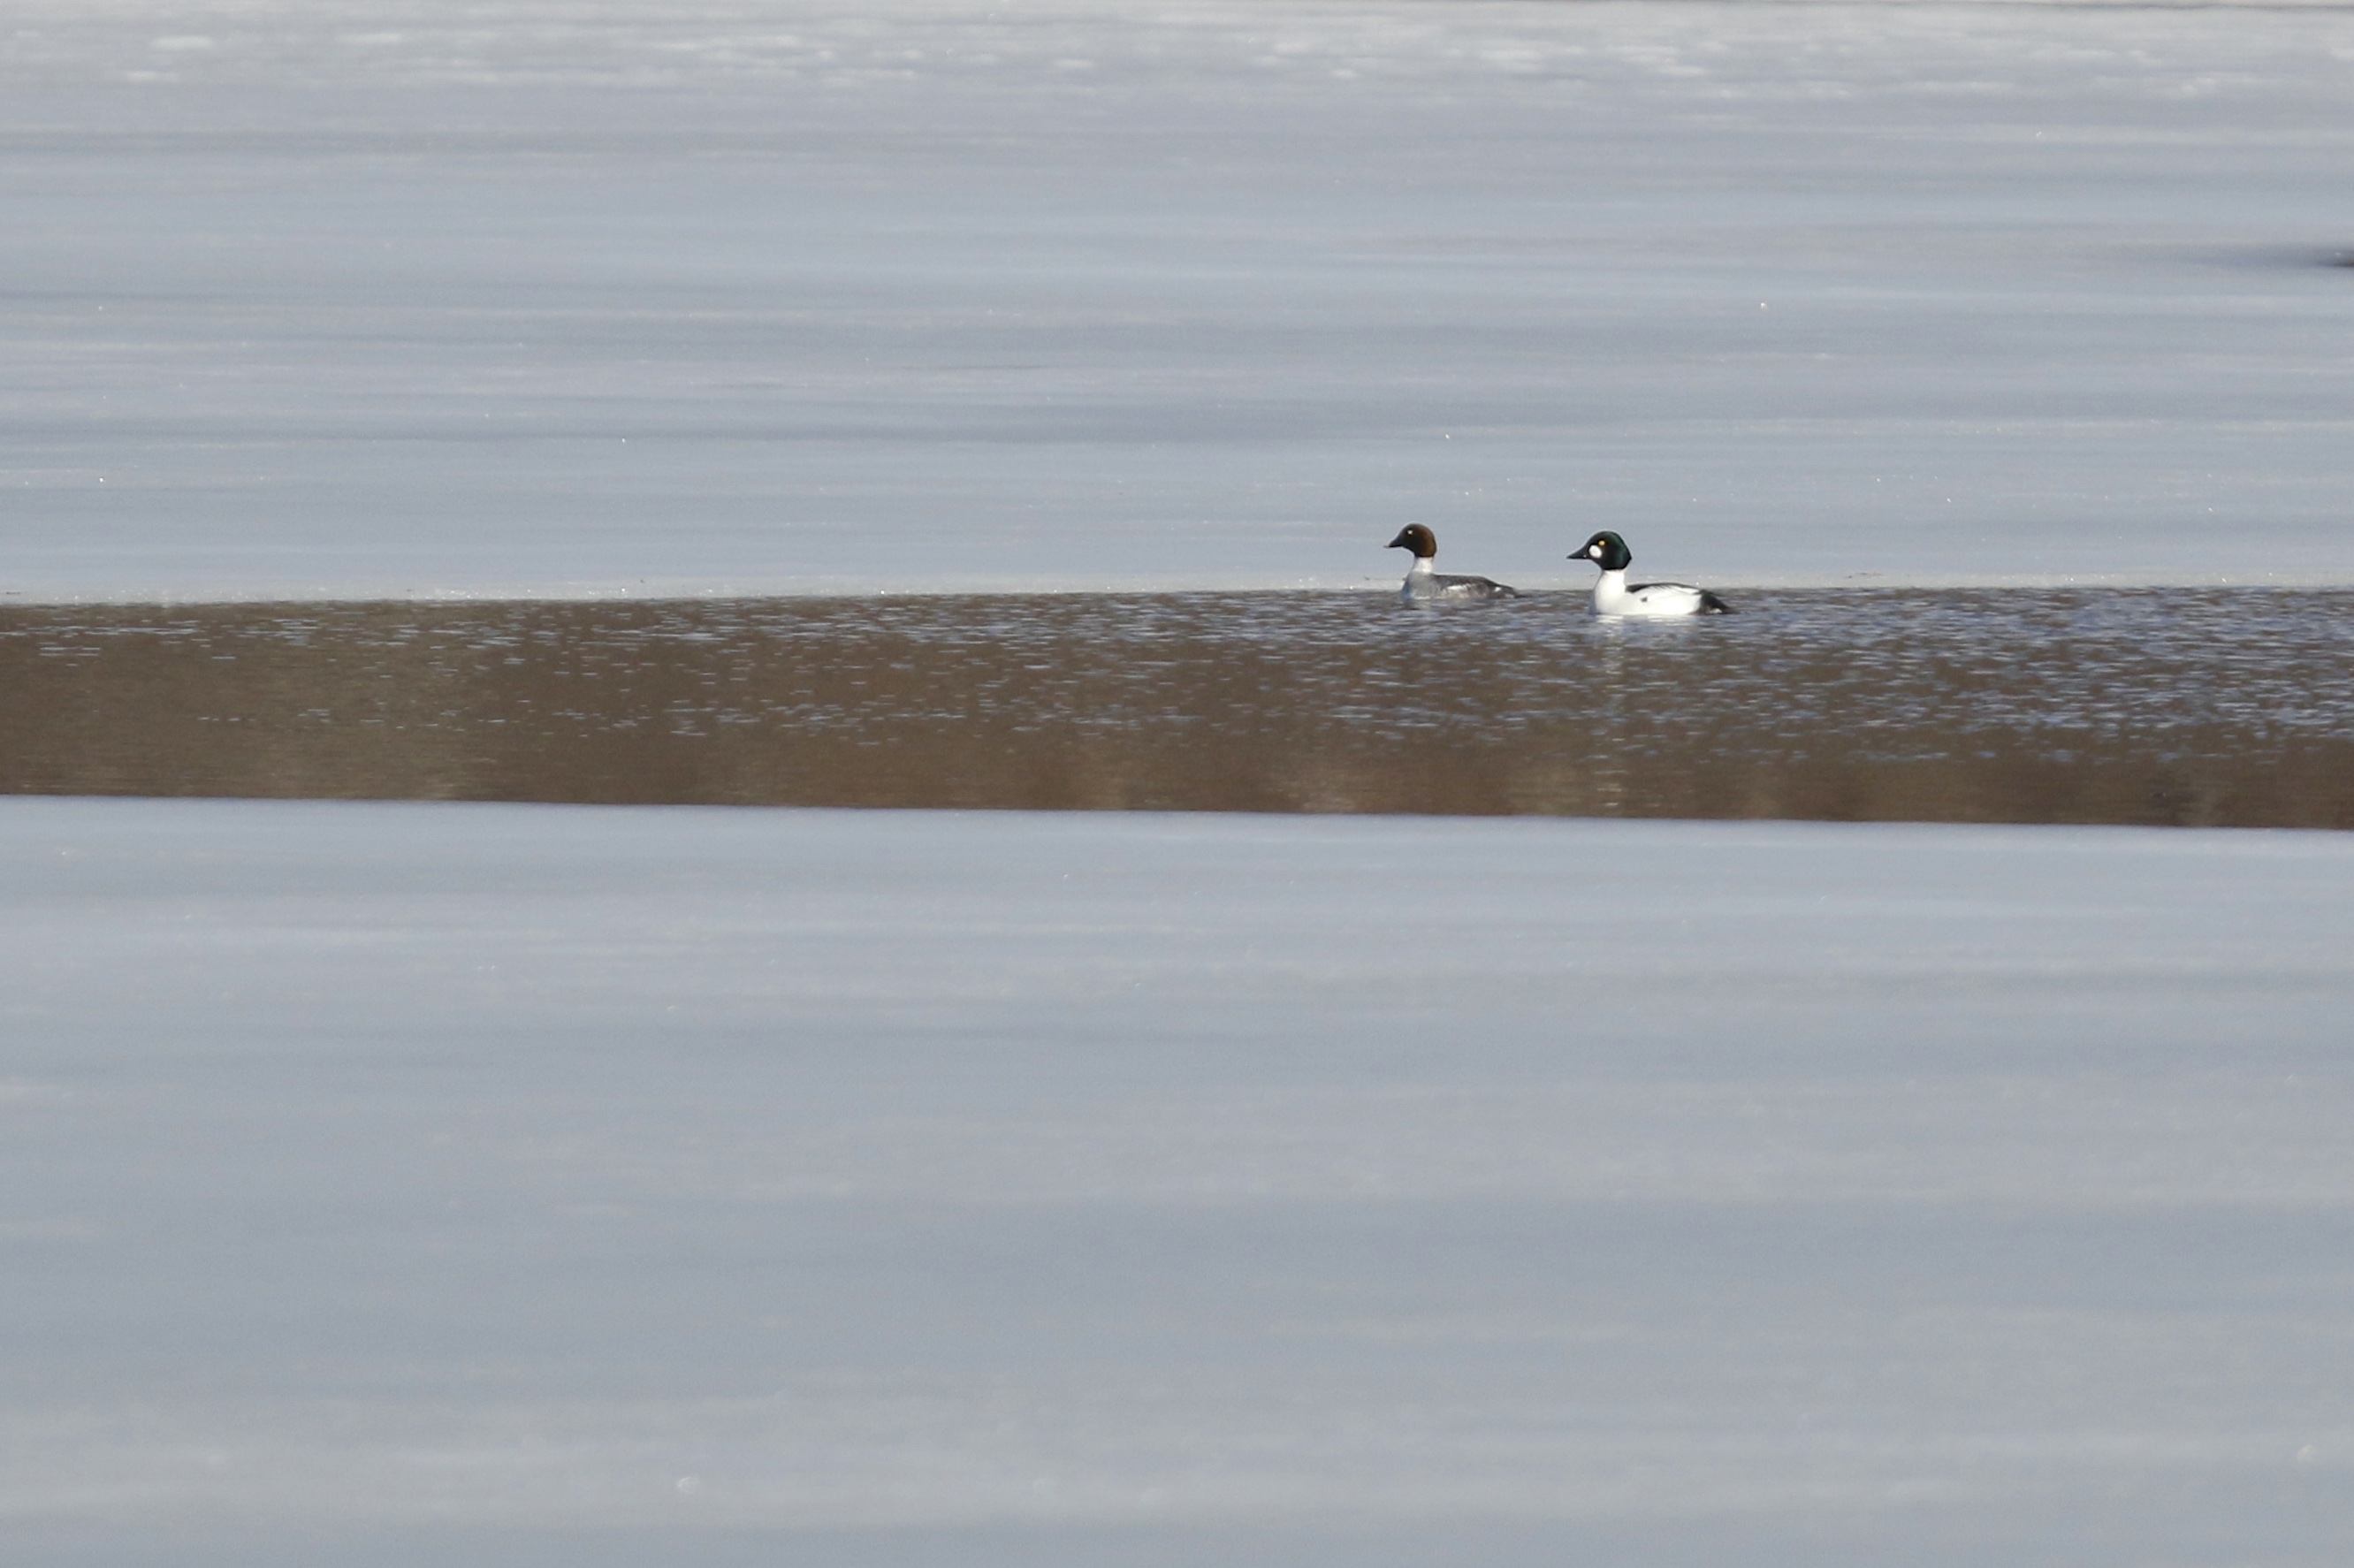 ~I thought these two would be the highlight of the day until I found the Snow Geese. Common Goldeneye at Glenmere Lake, 3/17/15.~